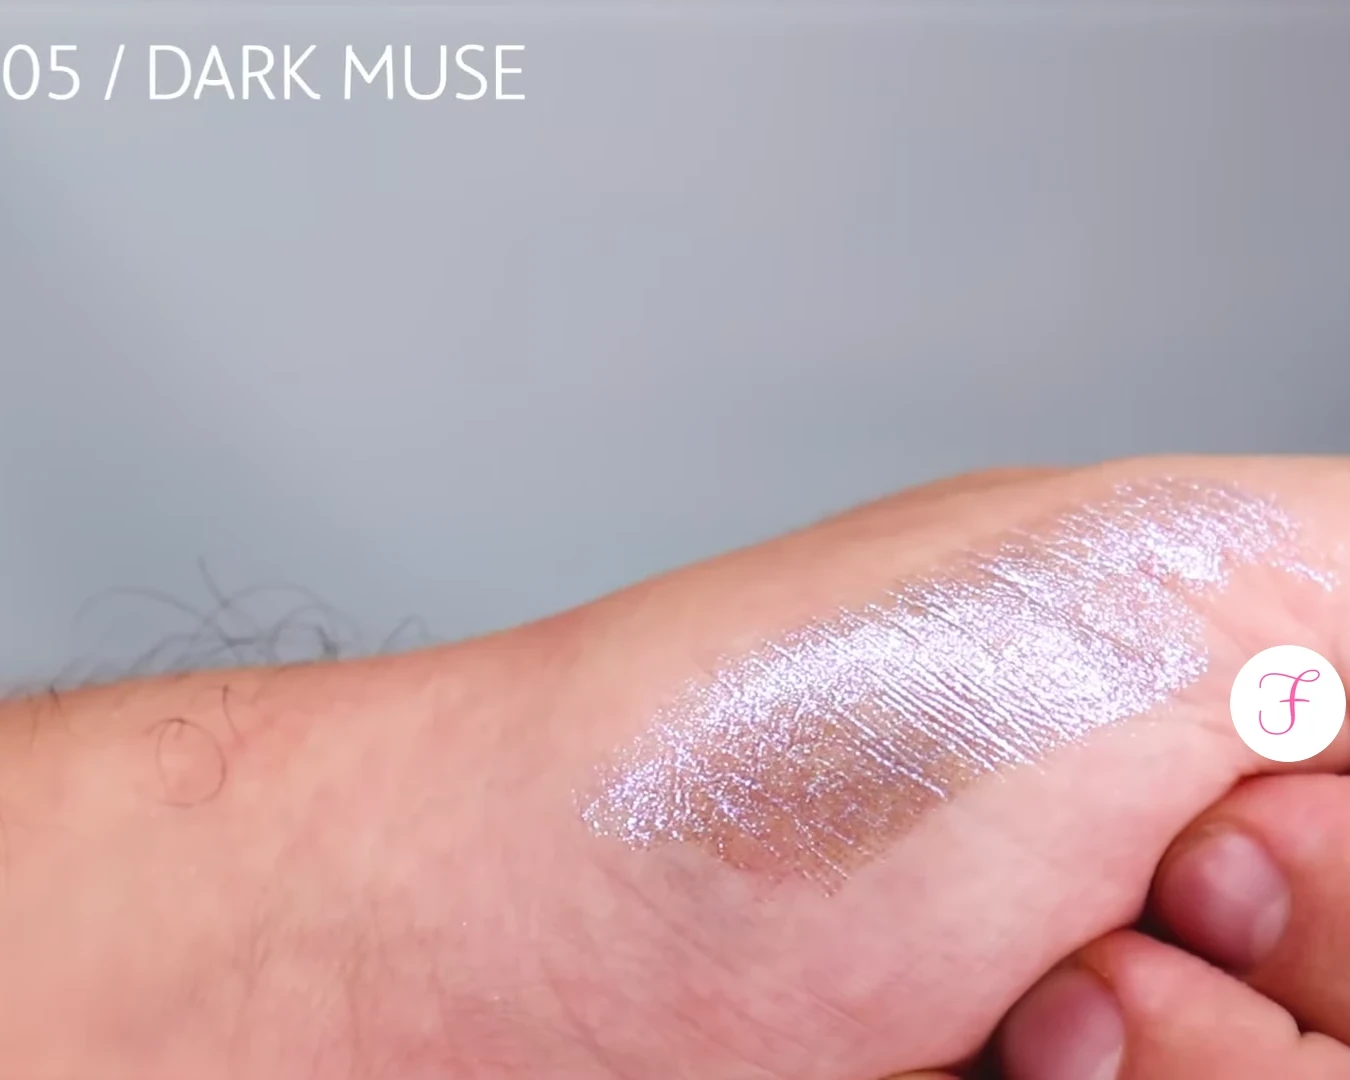 astra-chromo-therapy-05-dark-muse-swatches